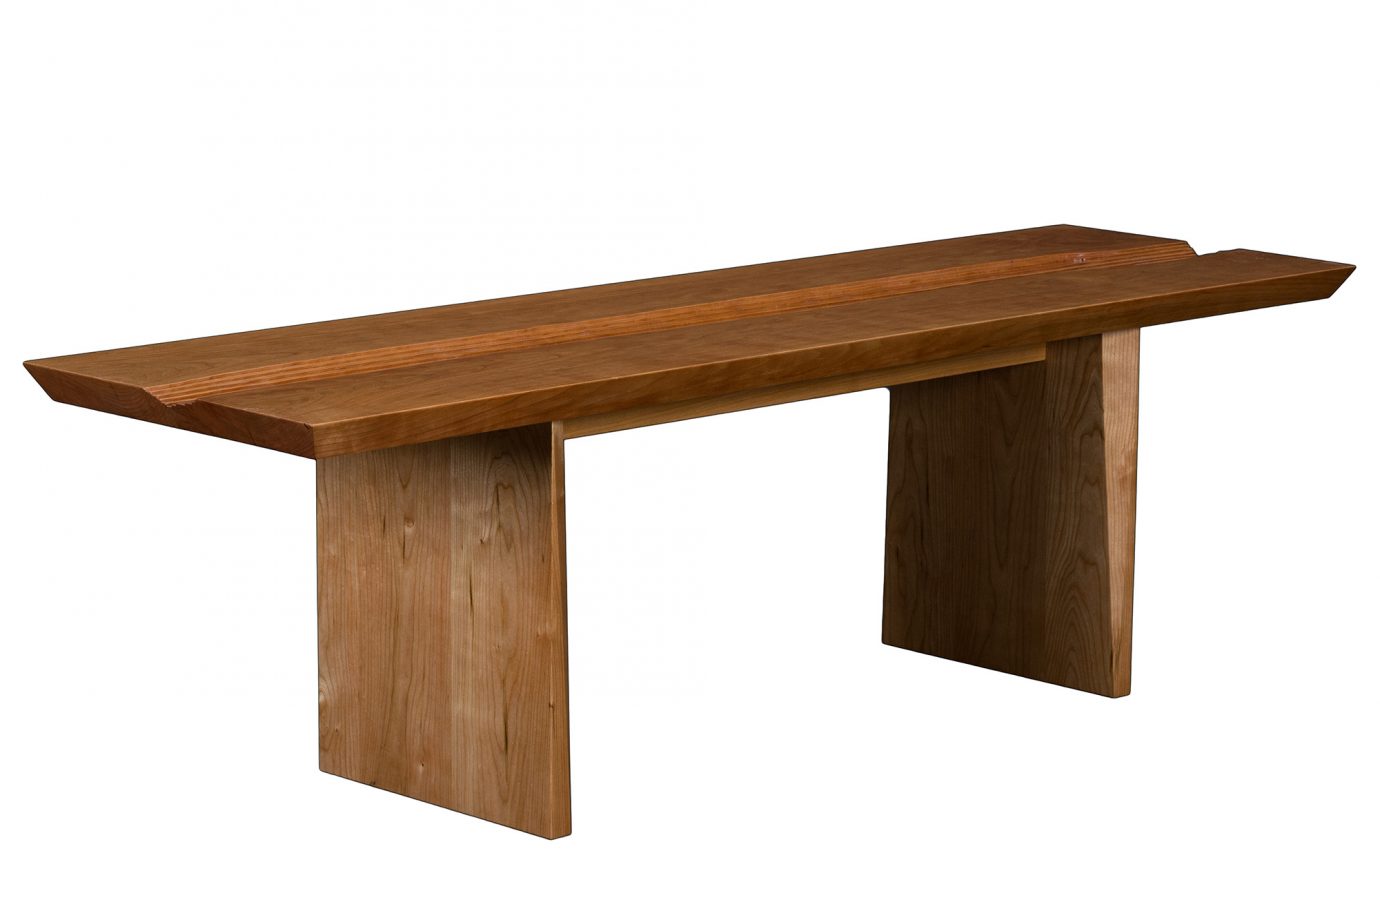 Rivers Coffee Table. Shown in cherry.